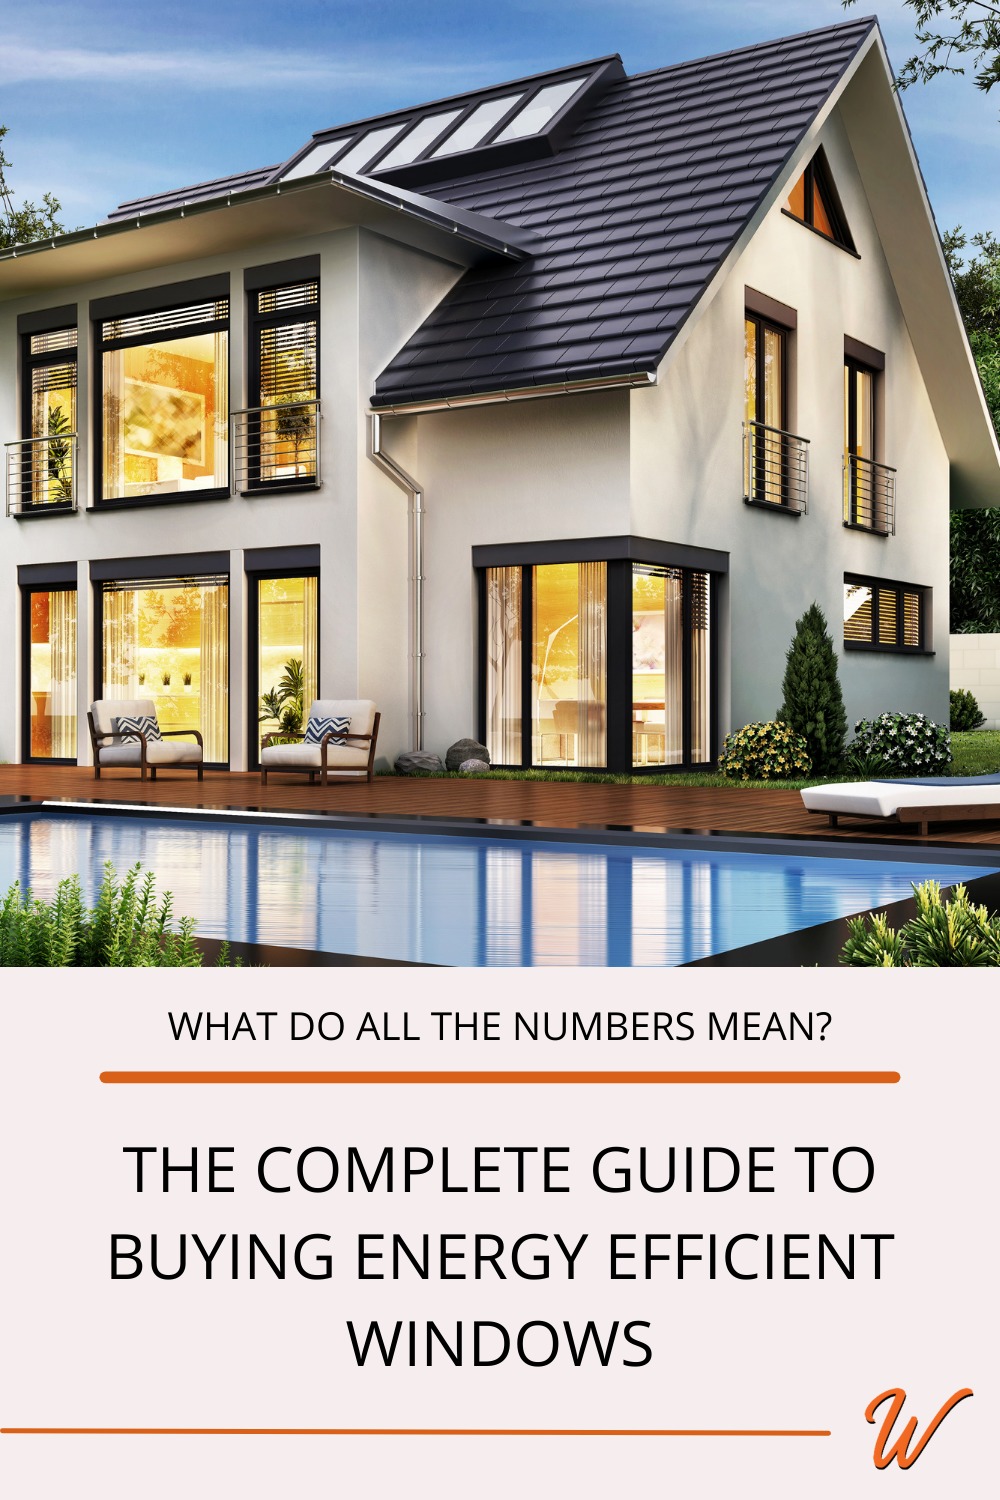 modern home with solar panels, pool, large black picture windows captioned with "What do all the numbers mean? The complete guide to buying energy efficient windows"